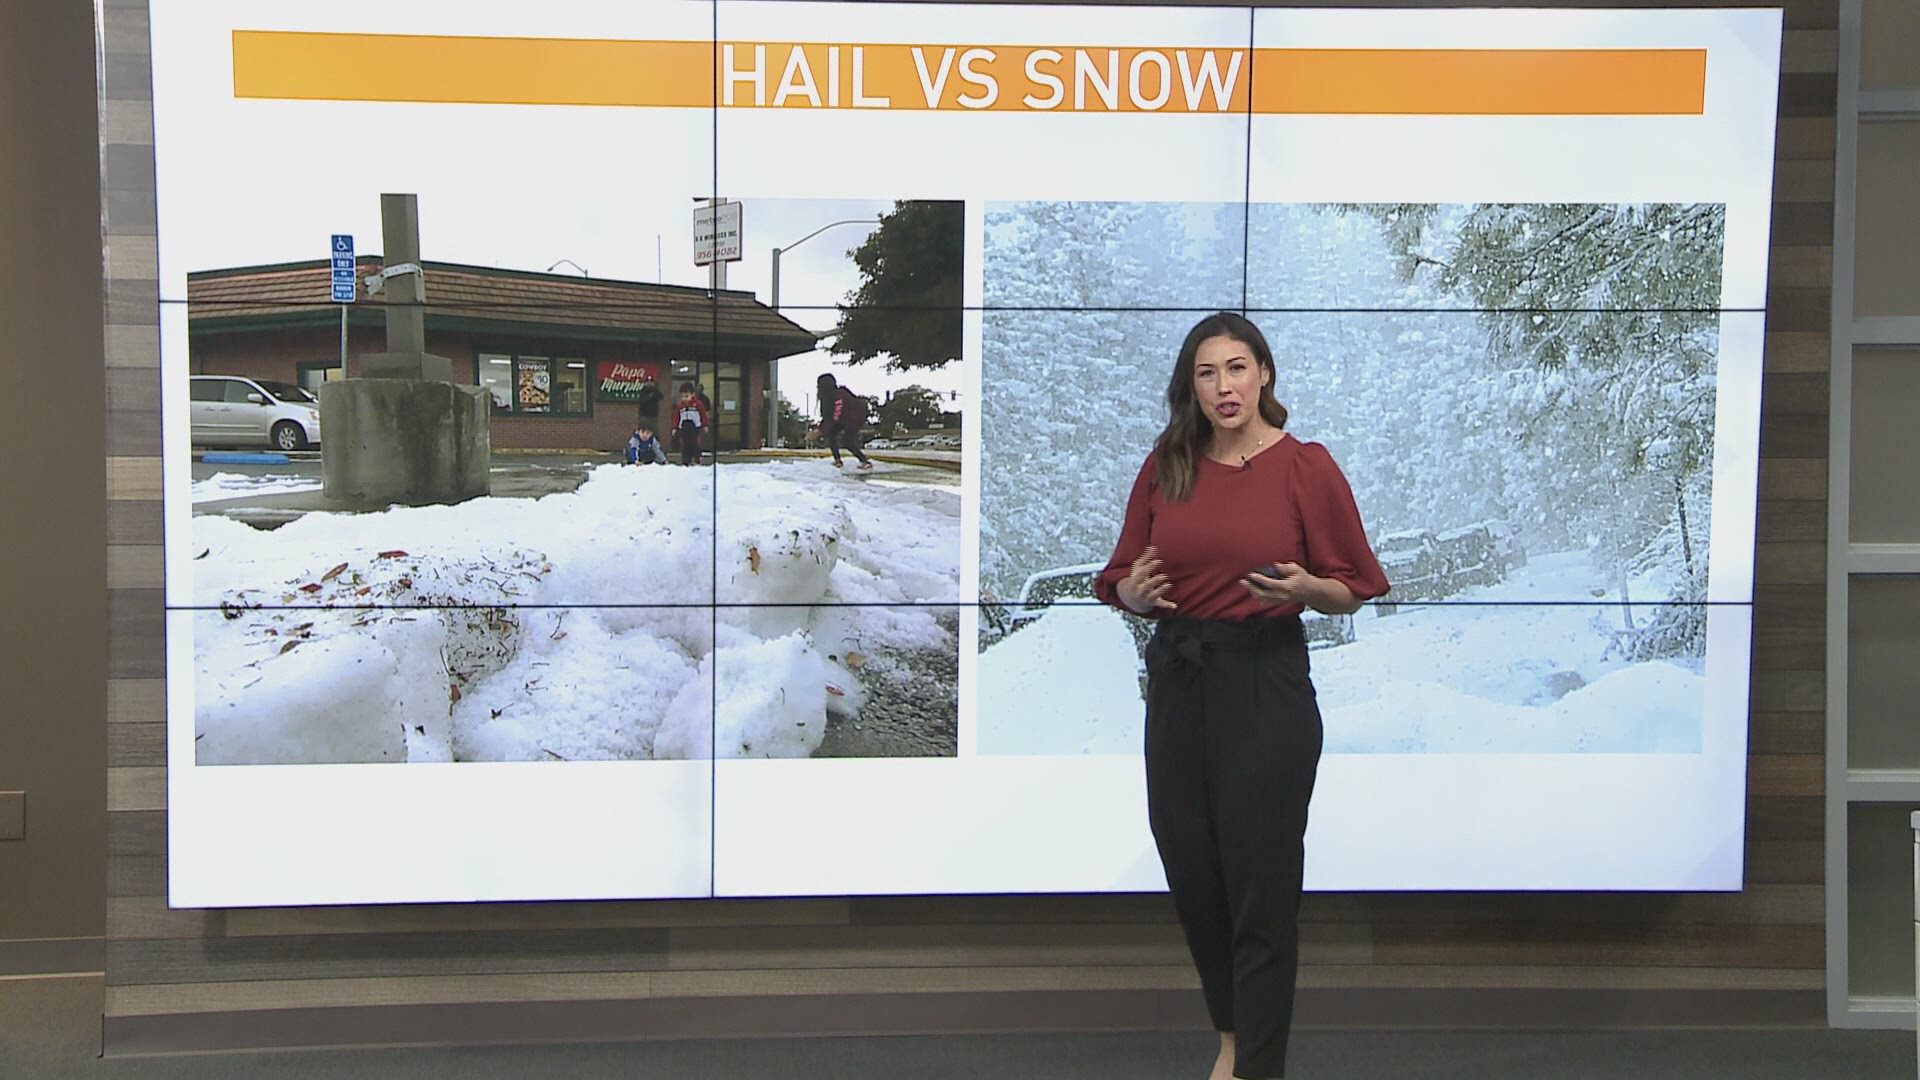 What's the difference between hail and snow?